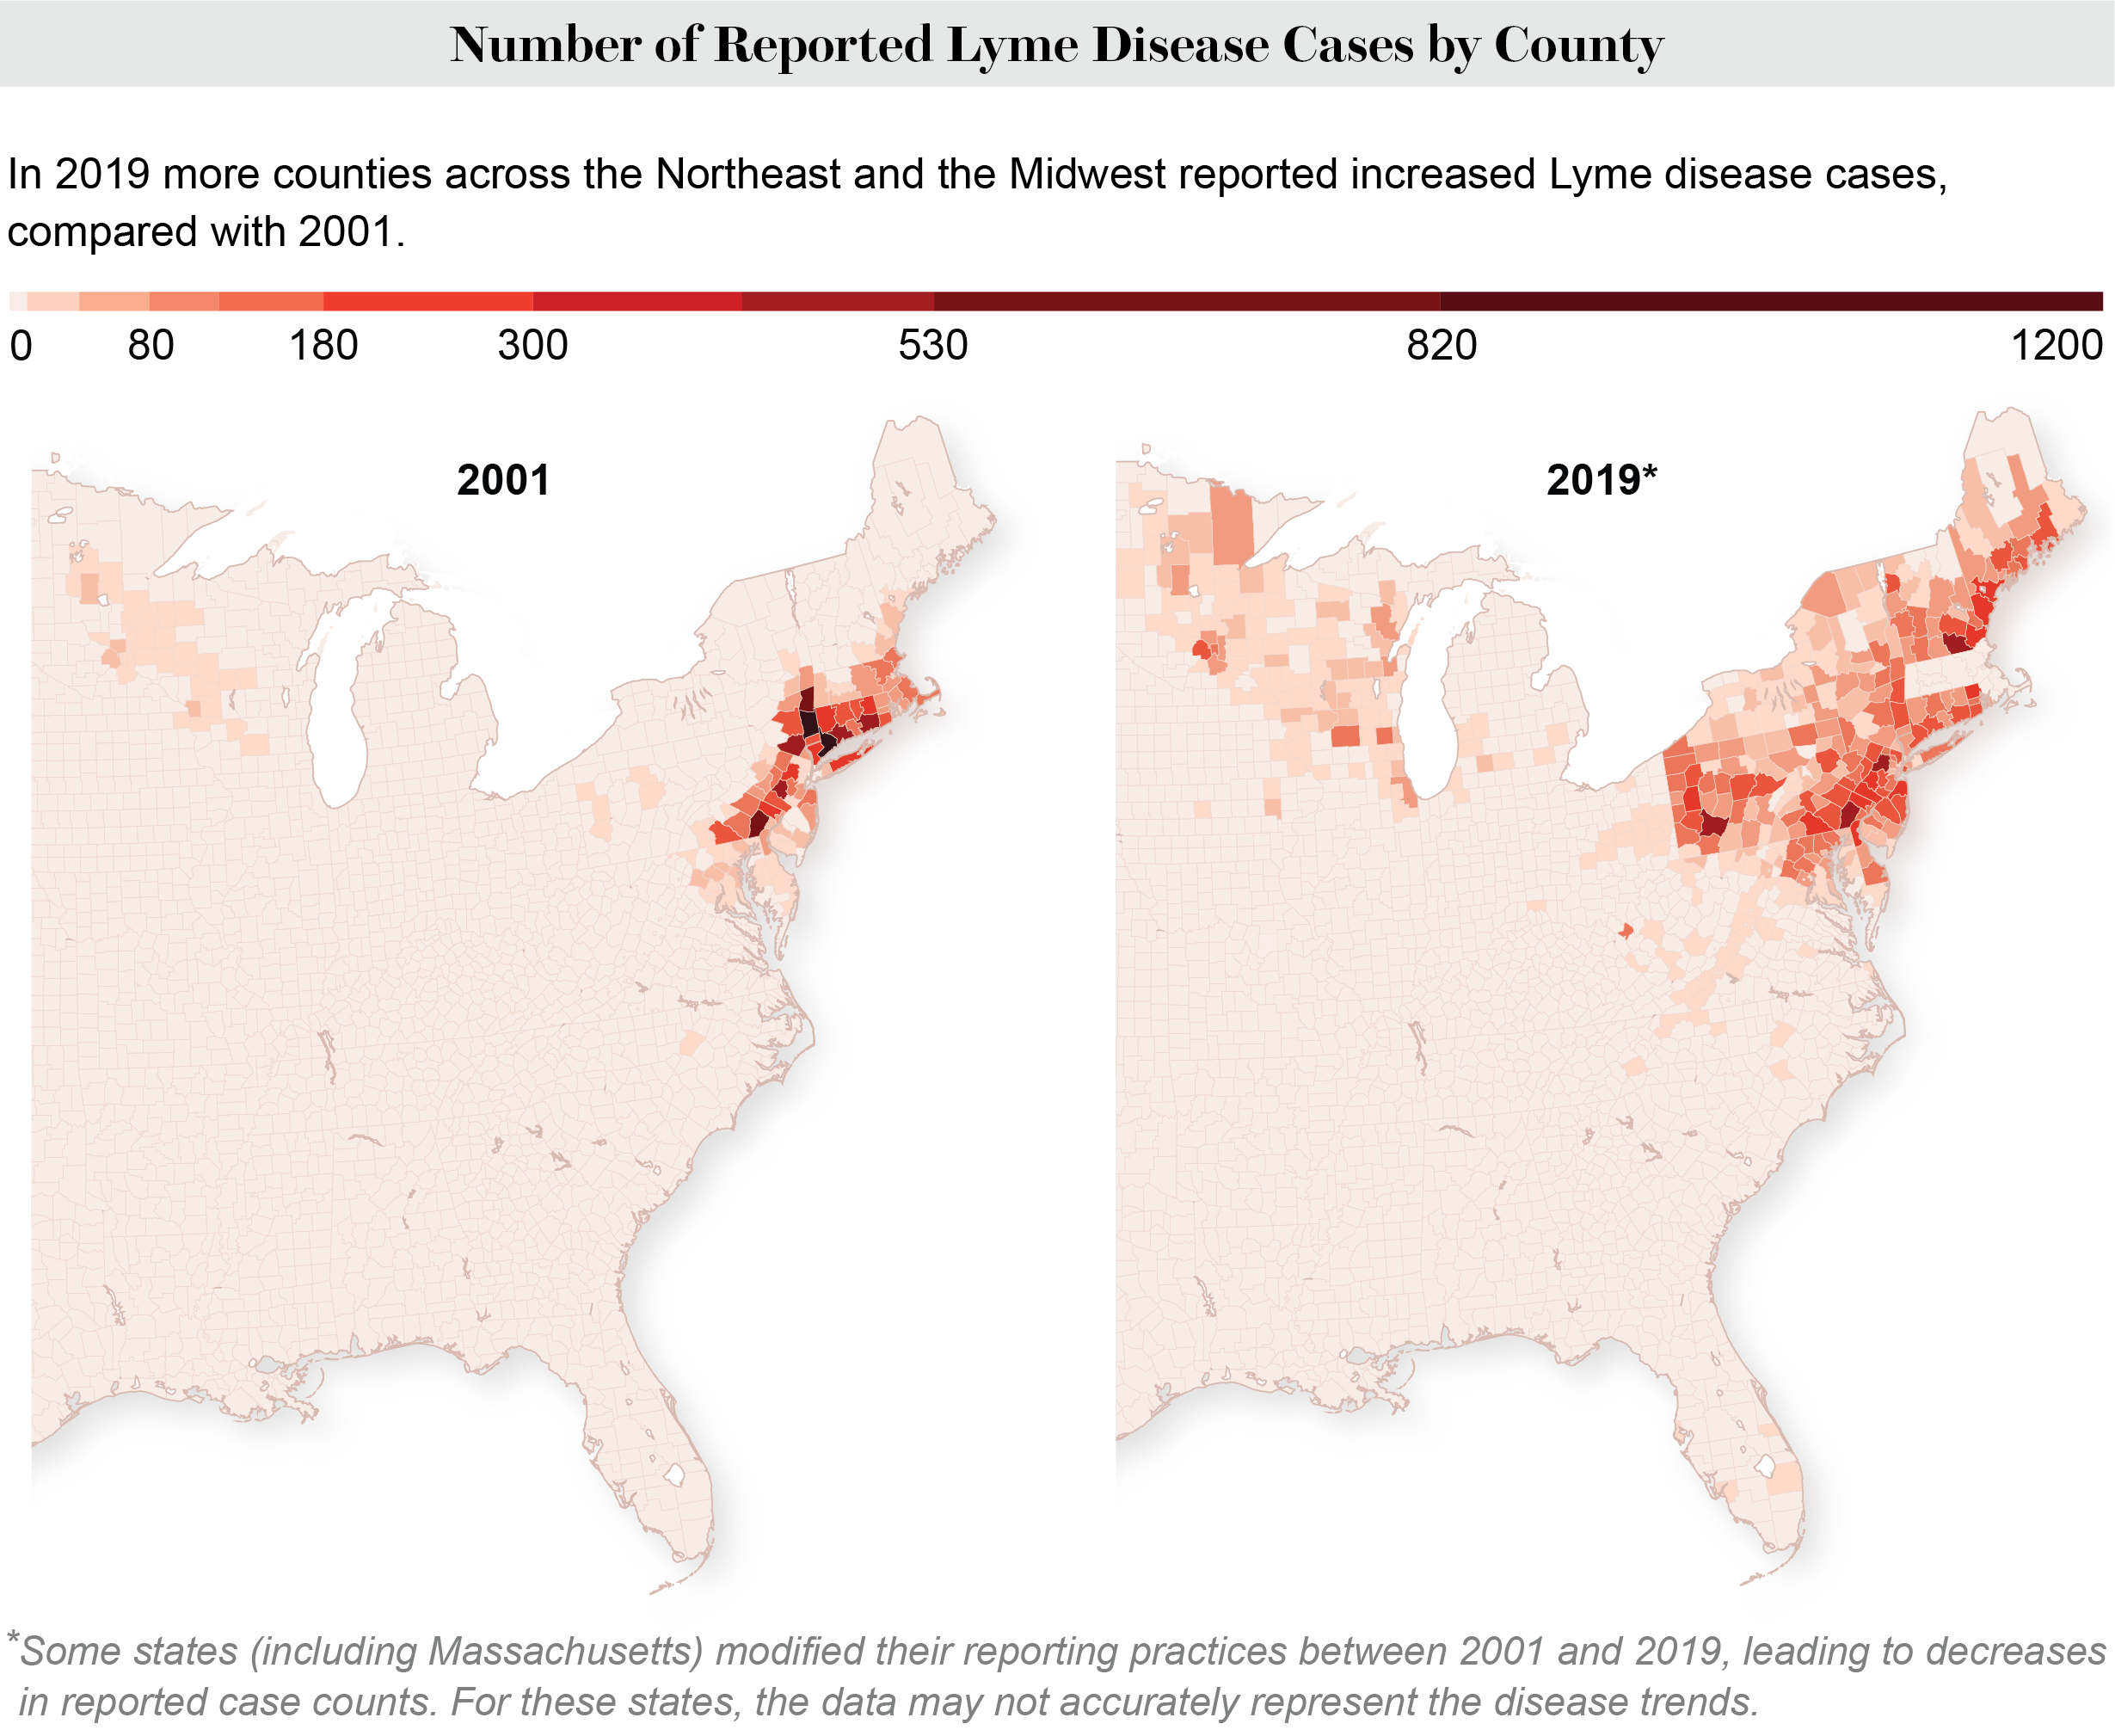 Two side-by-side maps of the U.S. from 2001 and 2019 show that Lyme disease cases have spread geographically throughout the Northeast and the Midwest.